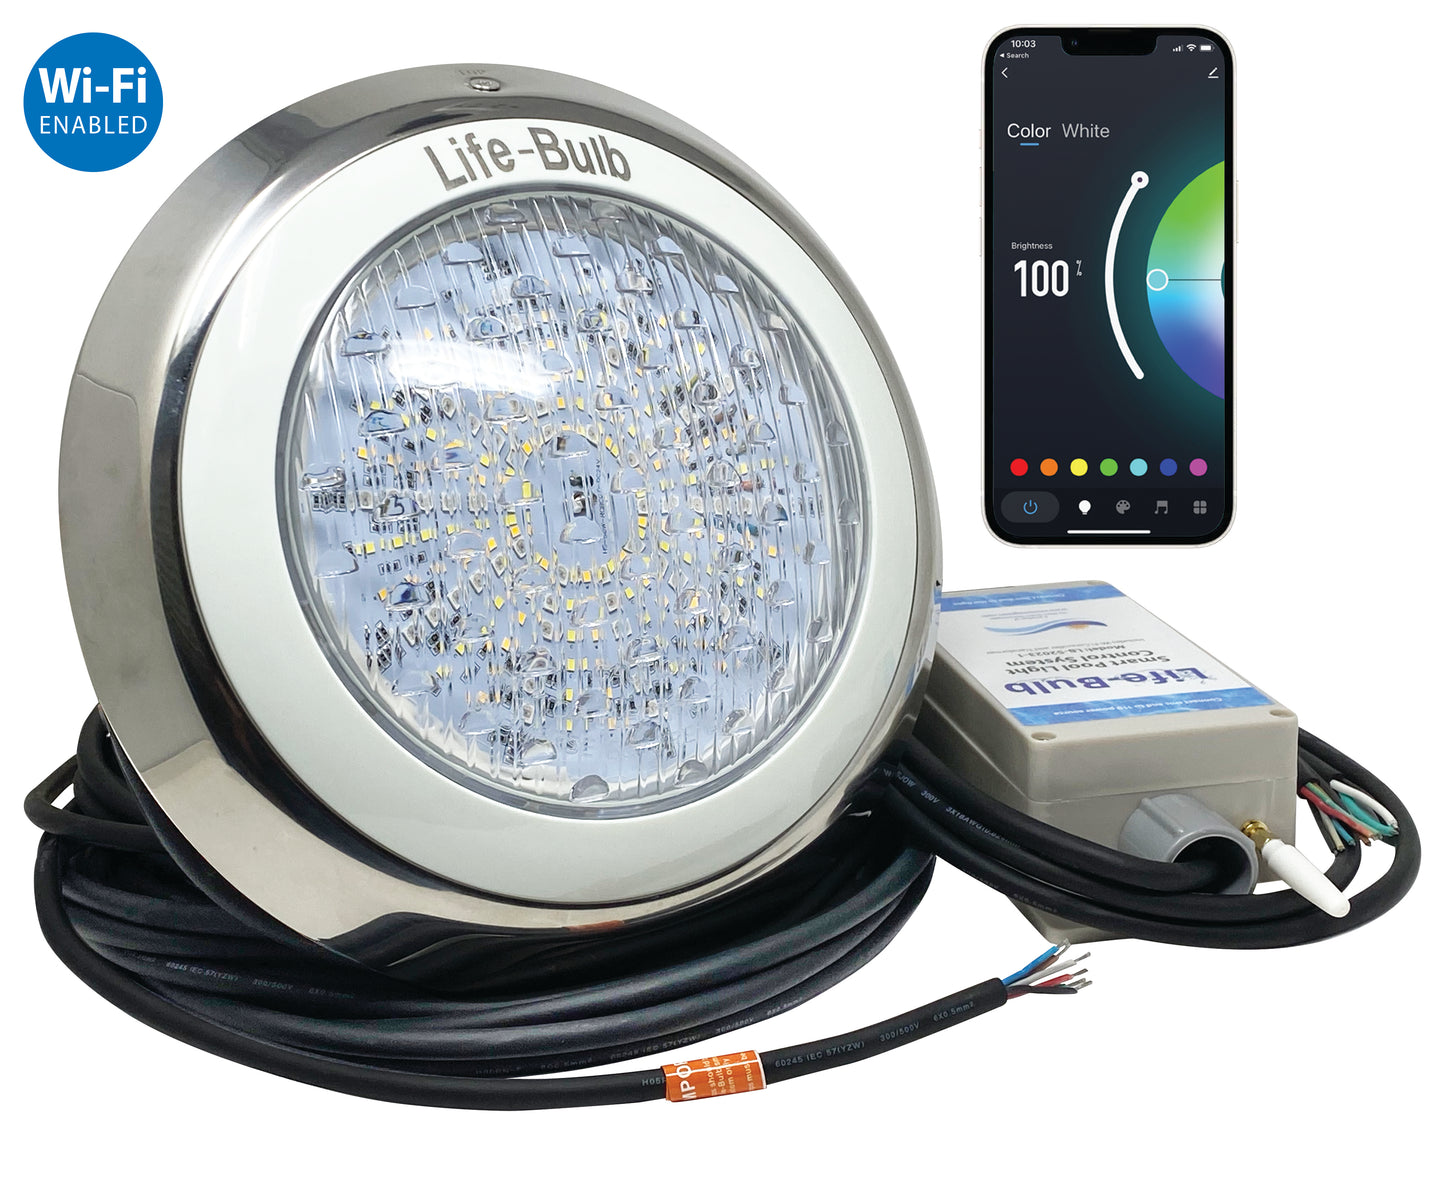 Life-Bulb Smart LED Color Changing Wall Mount Pool Light | Works with Remote or Phone App - iOS or Android | Lifetime Replacement Warranty | 75ft Cable